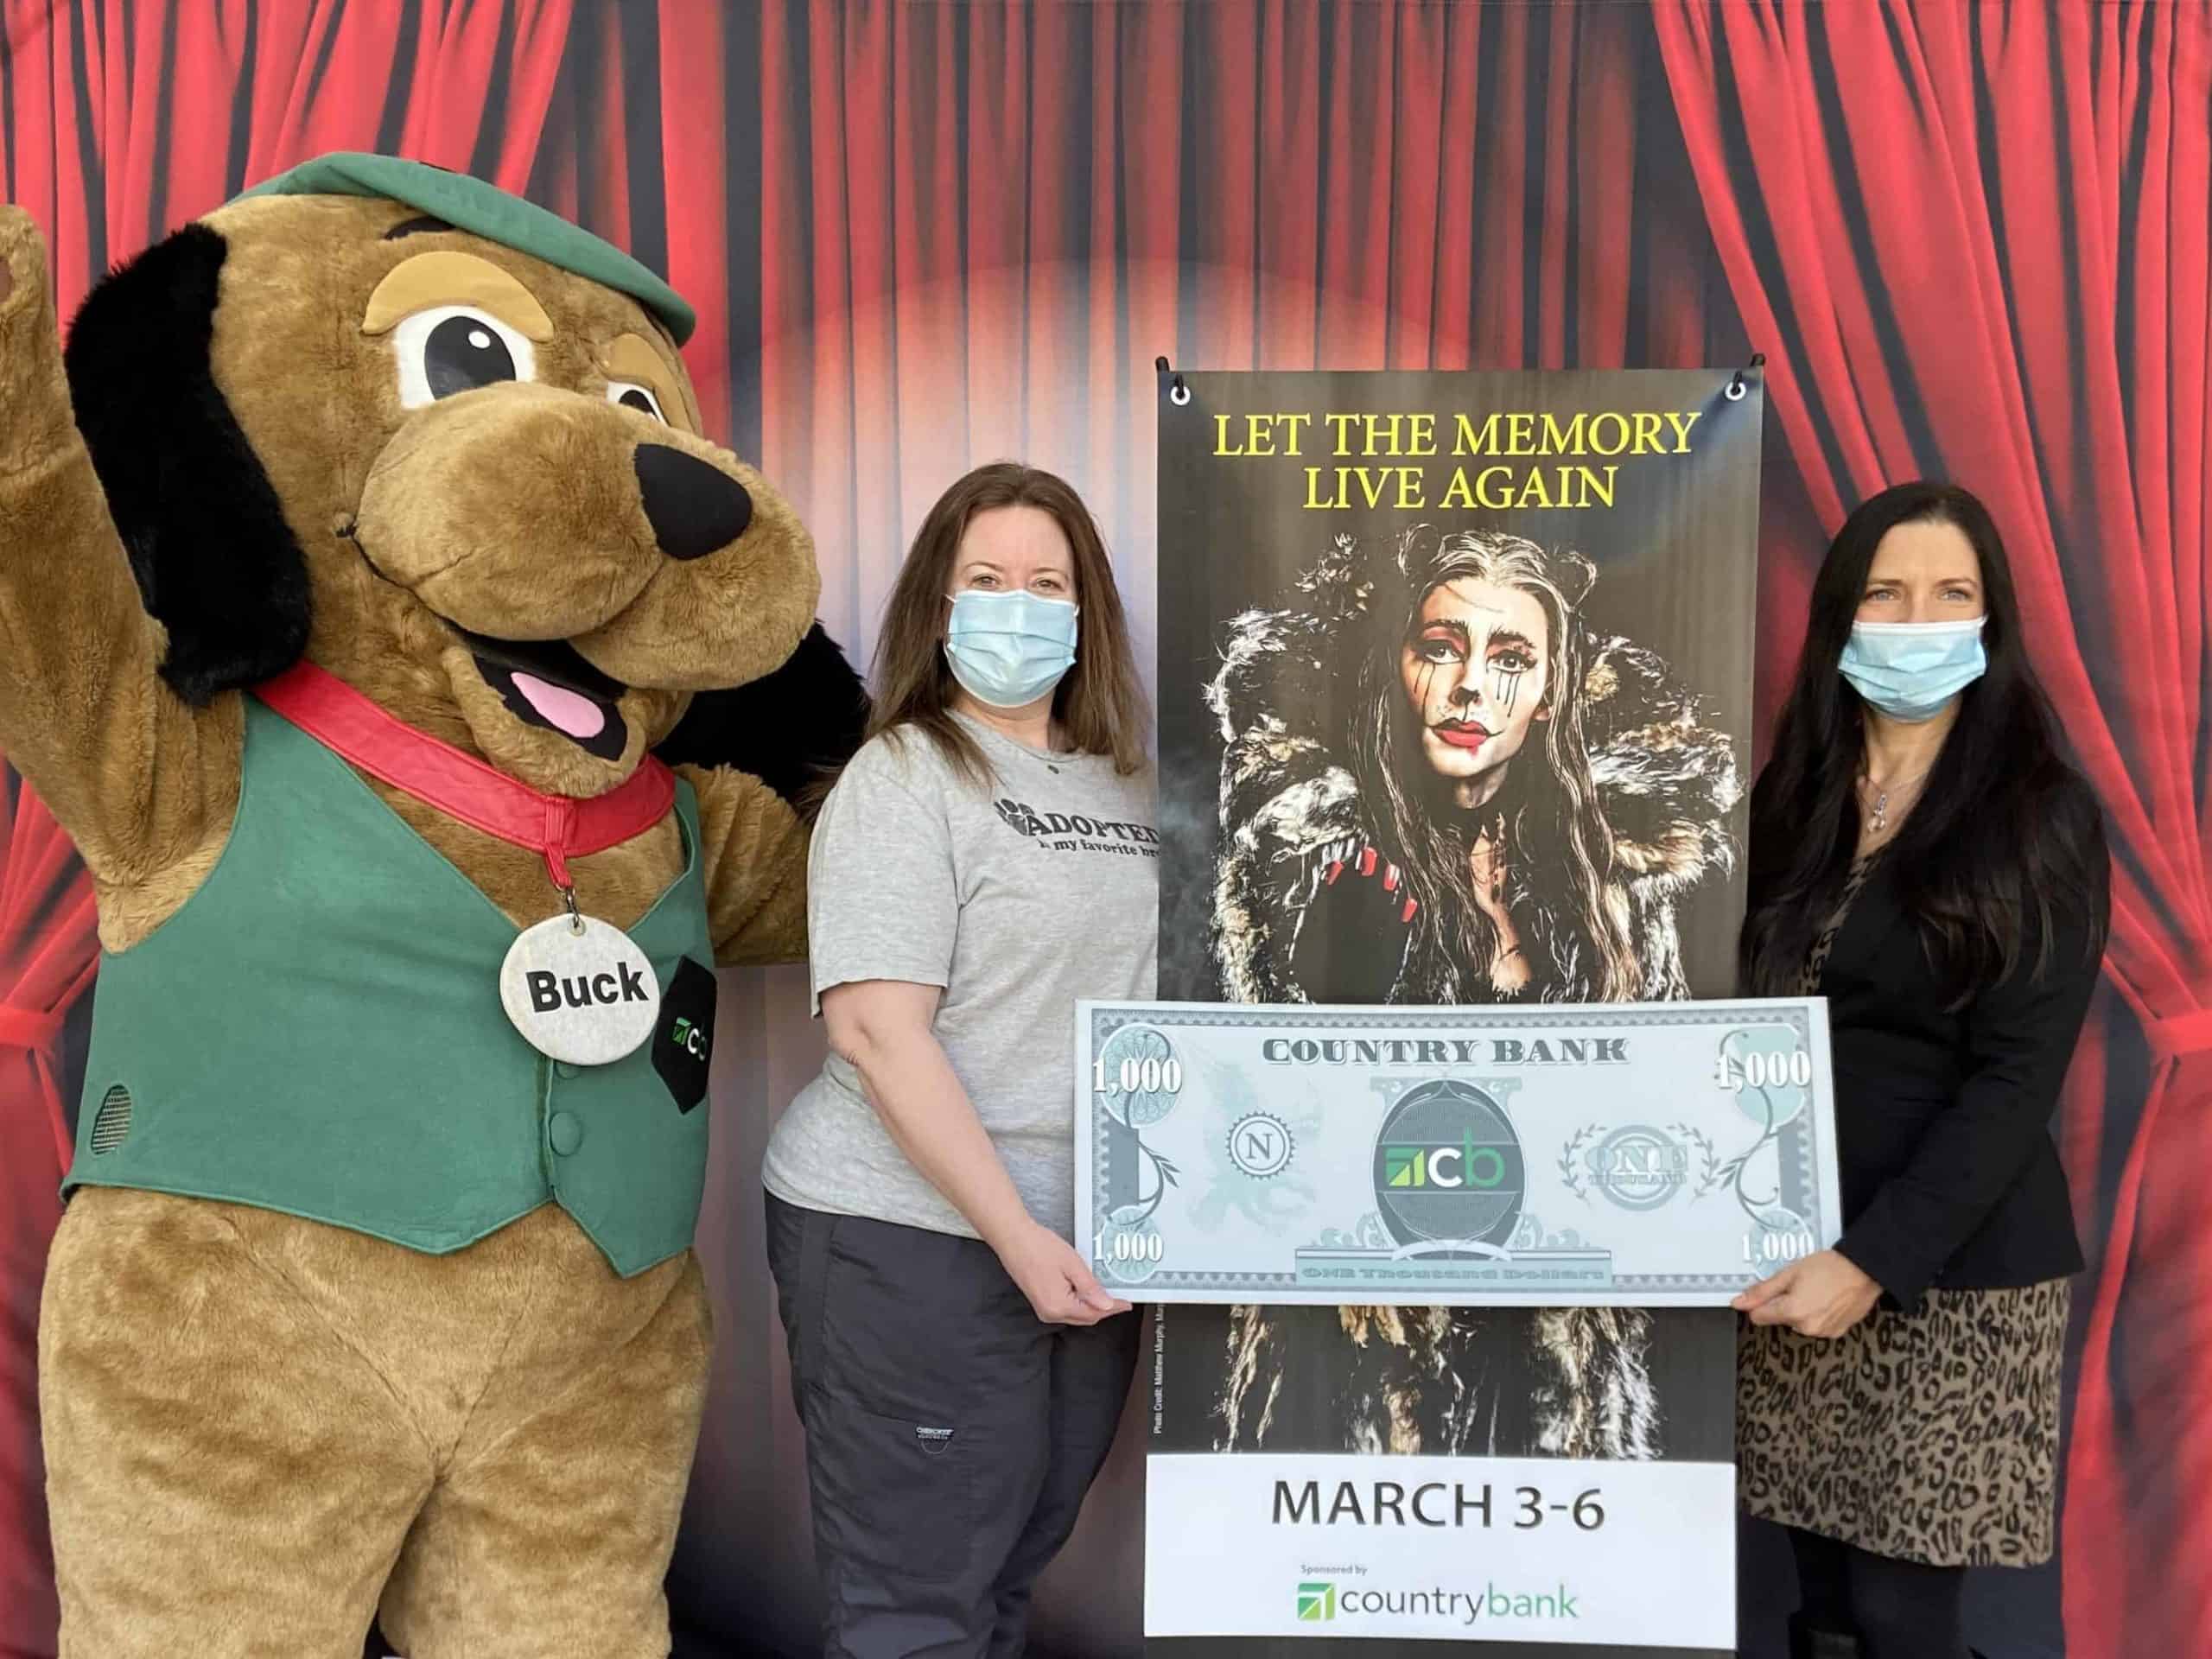 Country Bank's mascot Buck, a big brown dog with a green vest and cap, is standing alongside Kristin Mullins and Jodie Gerulaitis. Kristin and Jodie are holding a Country Bank $1,000 bill photo prop. 